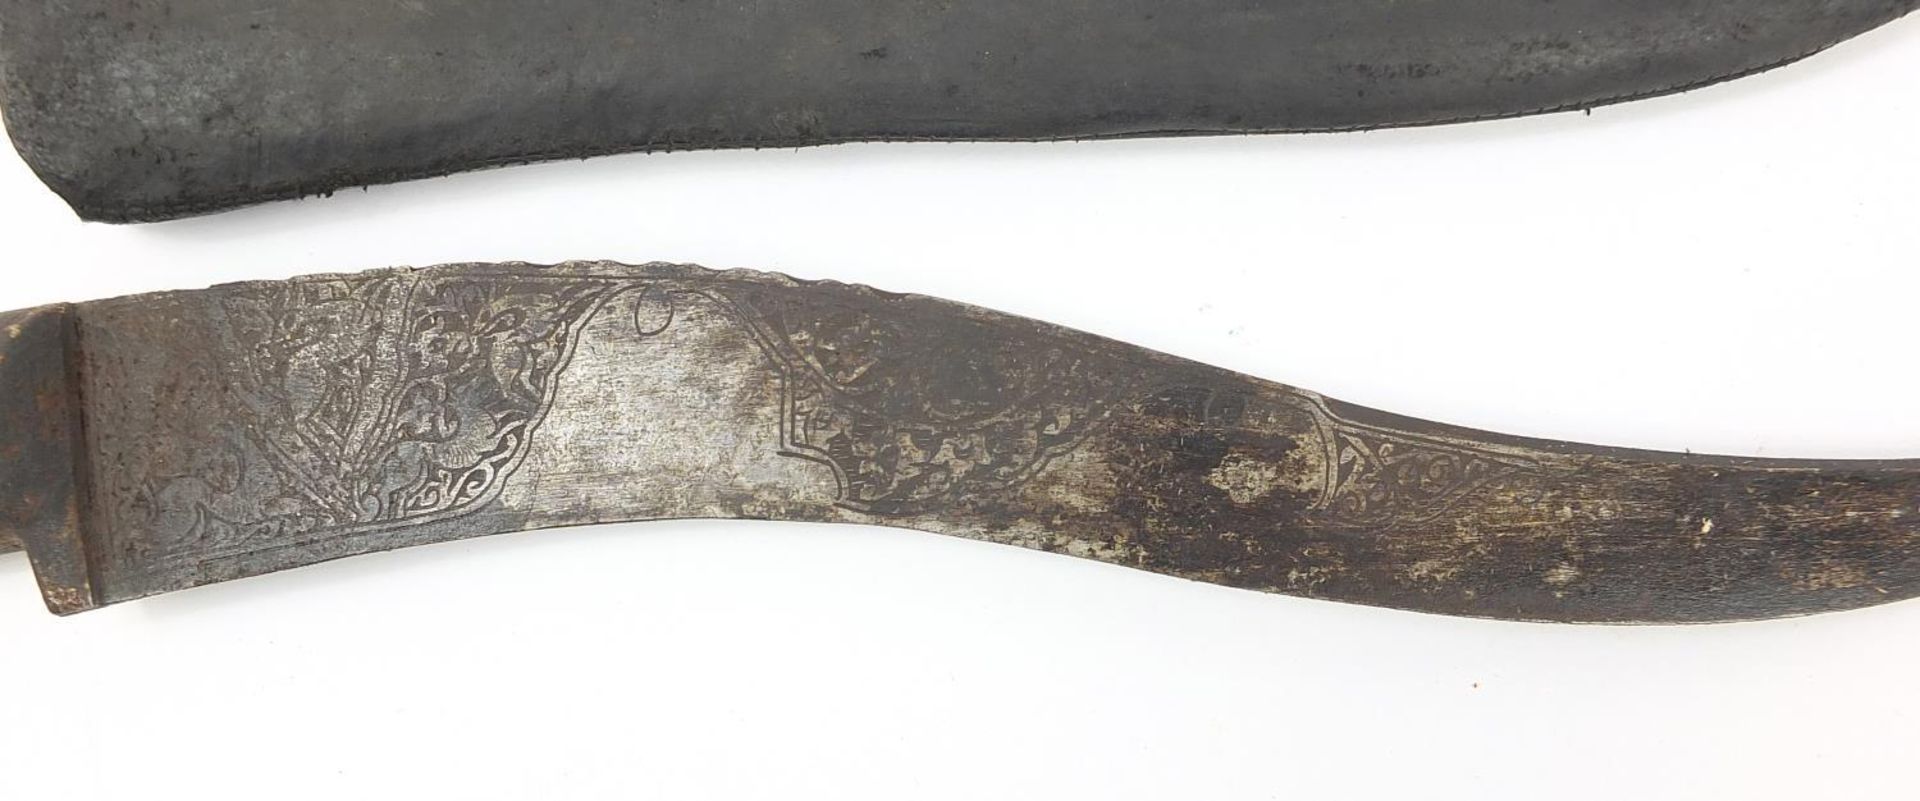 Afghan Pesh-kabz knife with bone handle, sheath and steel blade engraved with a wild animals and - Image 7 of 8